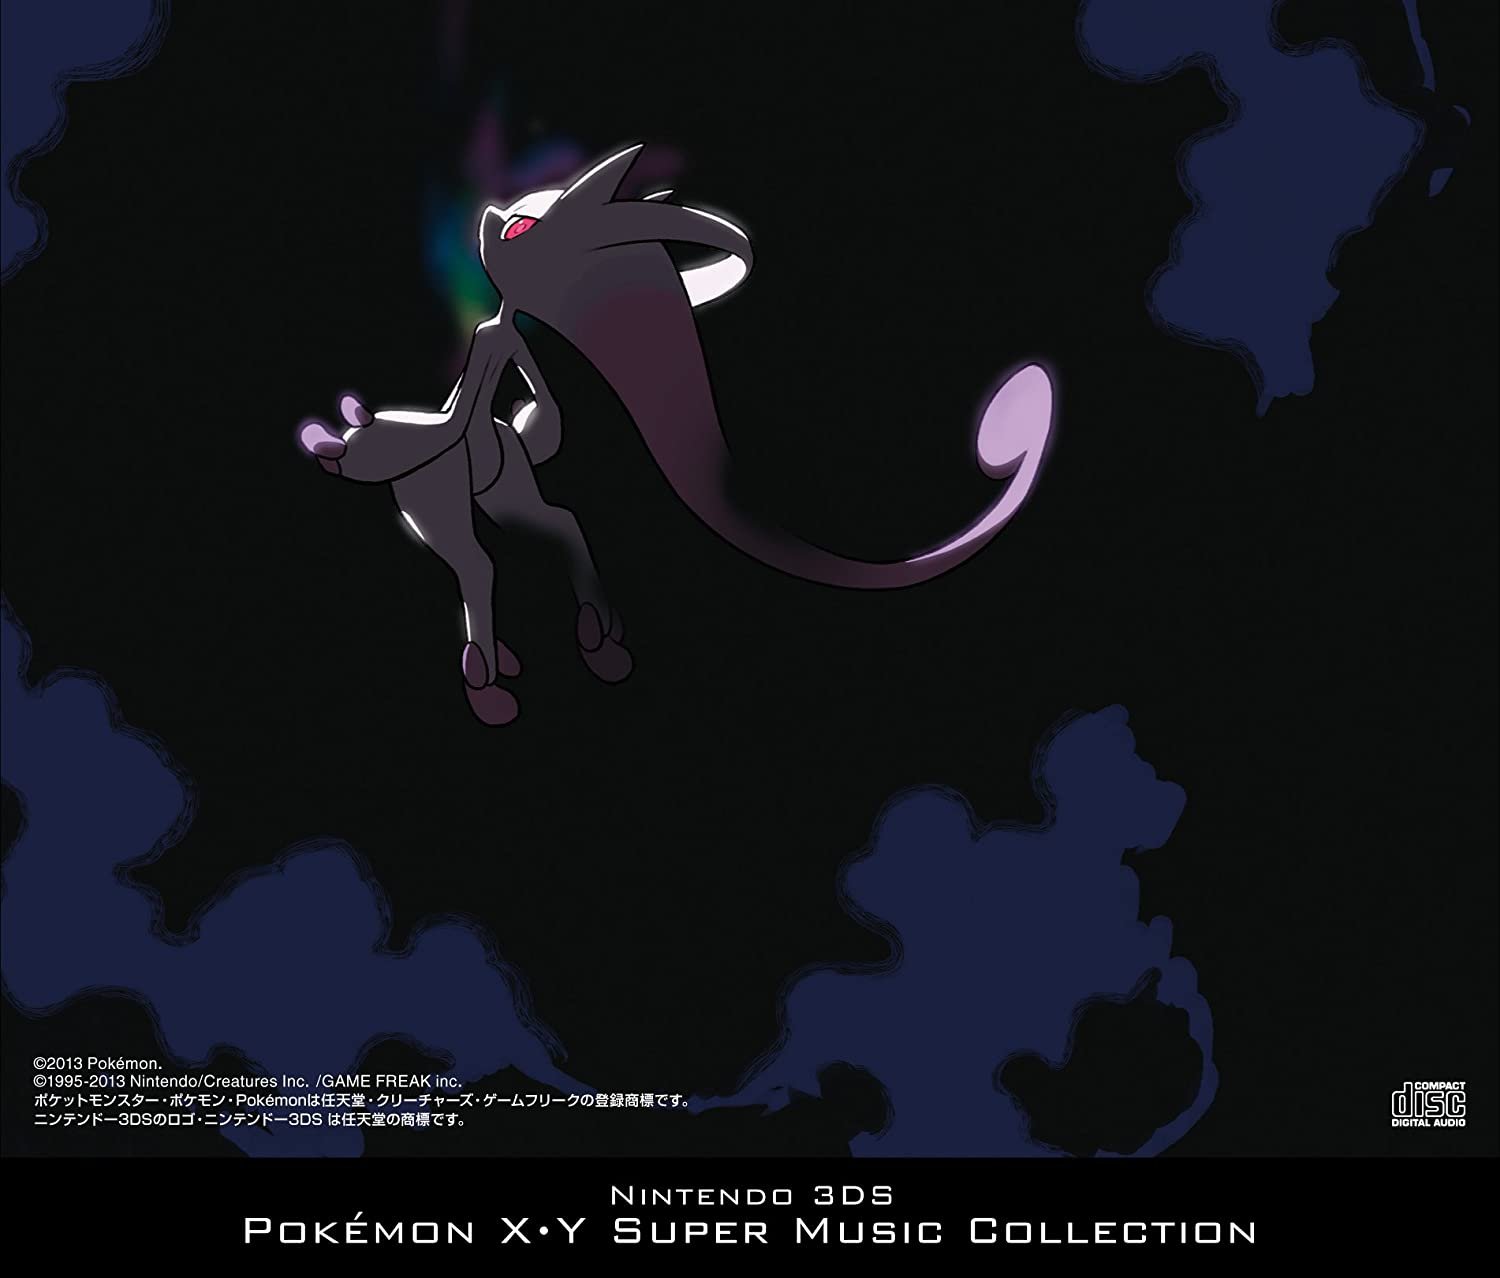 Mega Mewtwo Y Collection